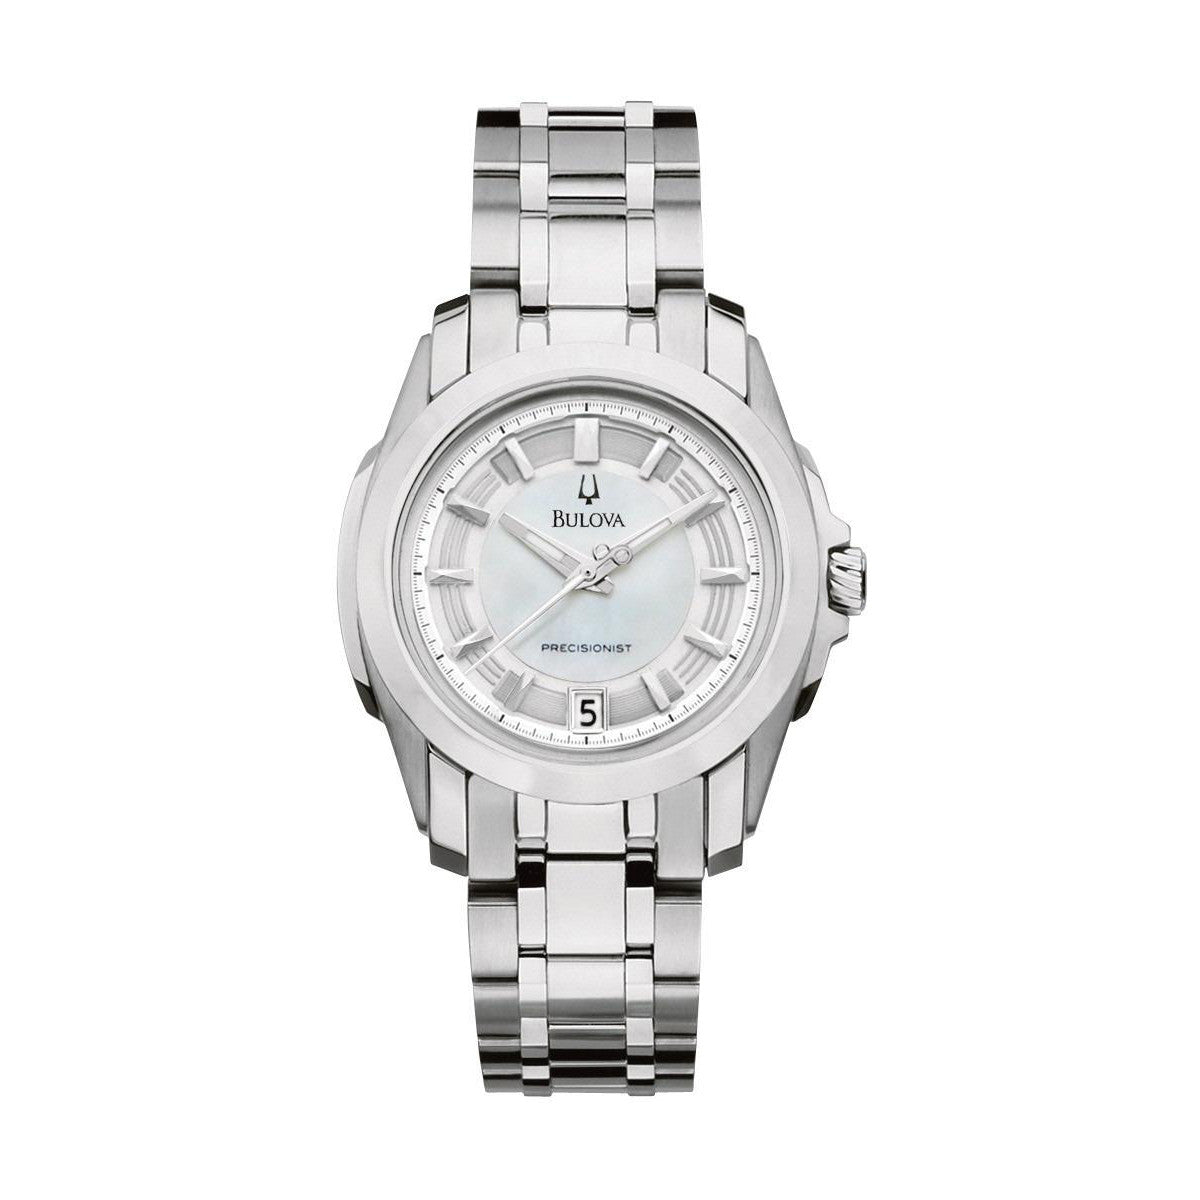 Bulova Precisionist 96M108 White Mother of Pearl Dial Stainless Steel Ladies Watch